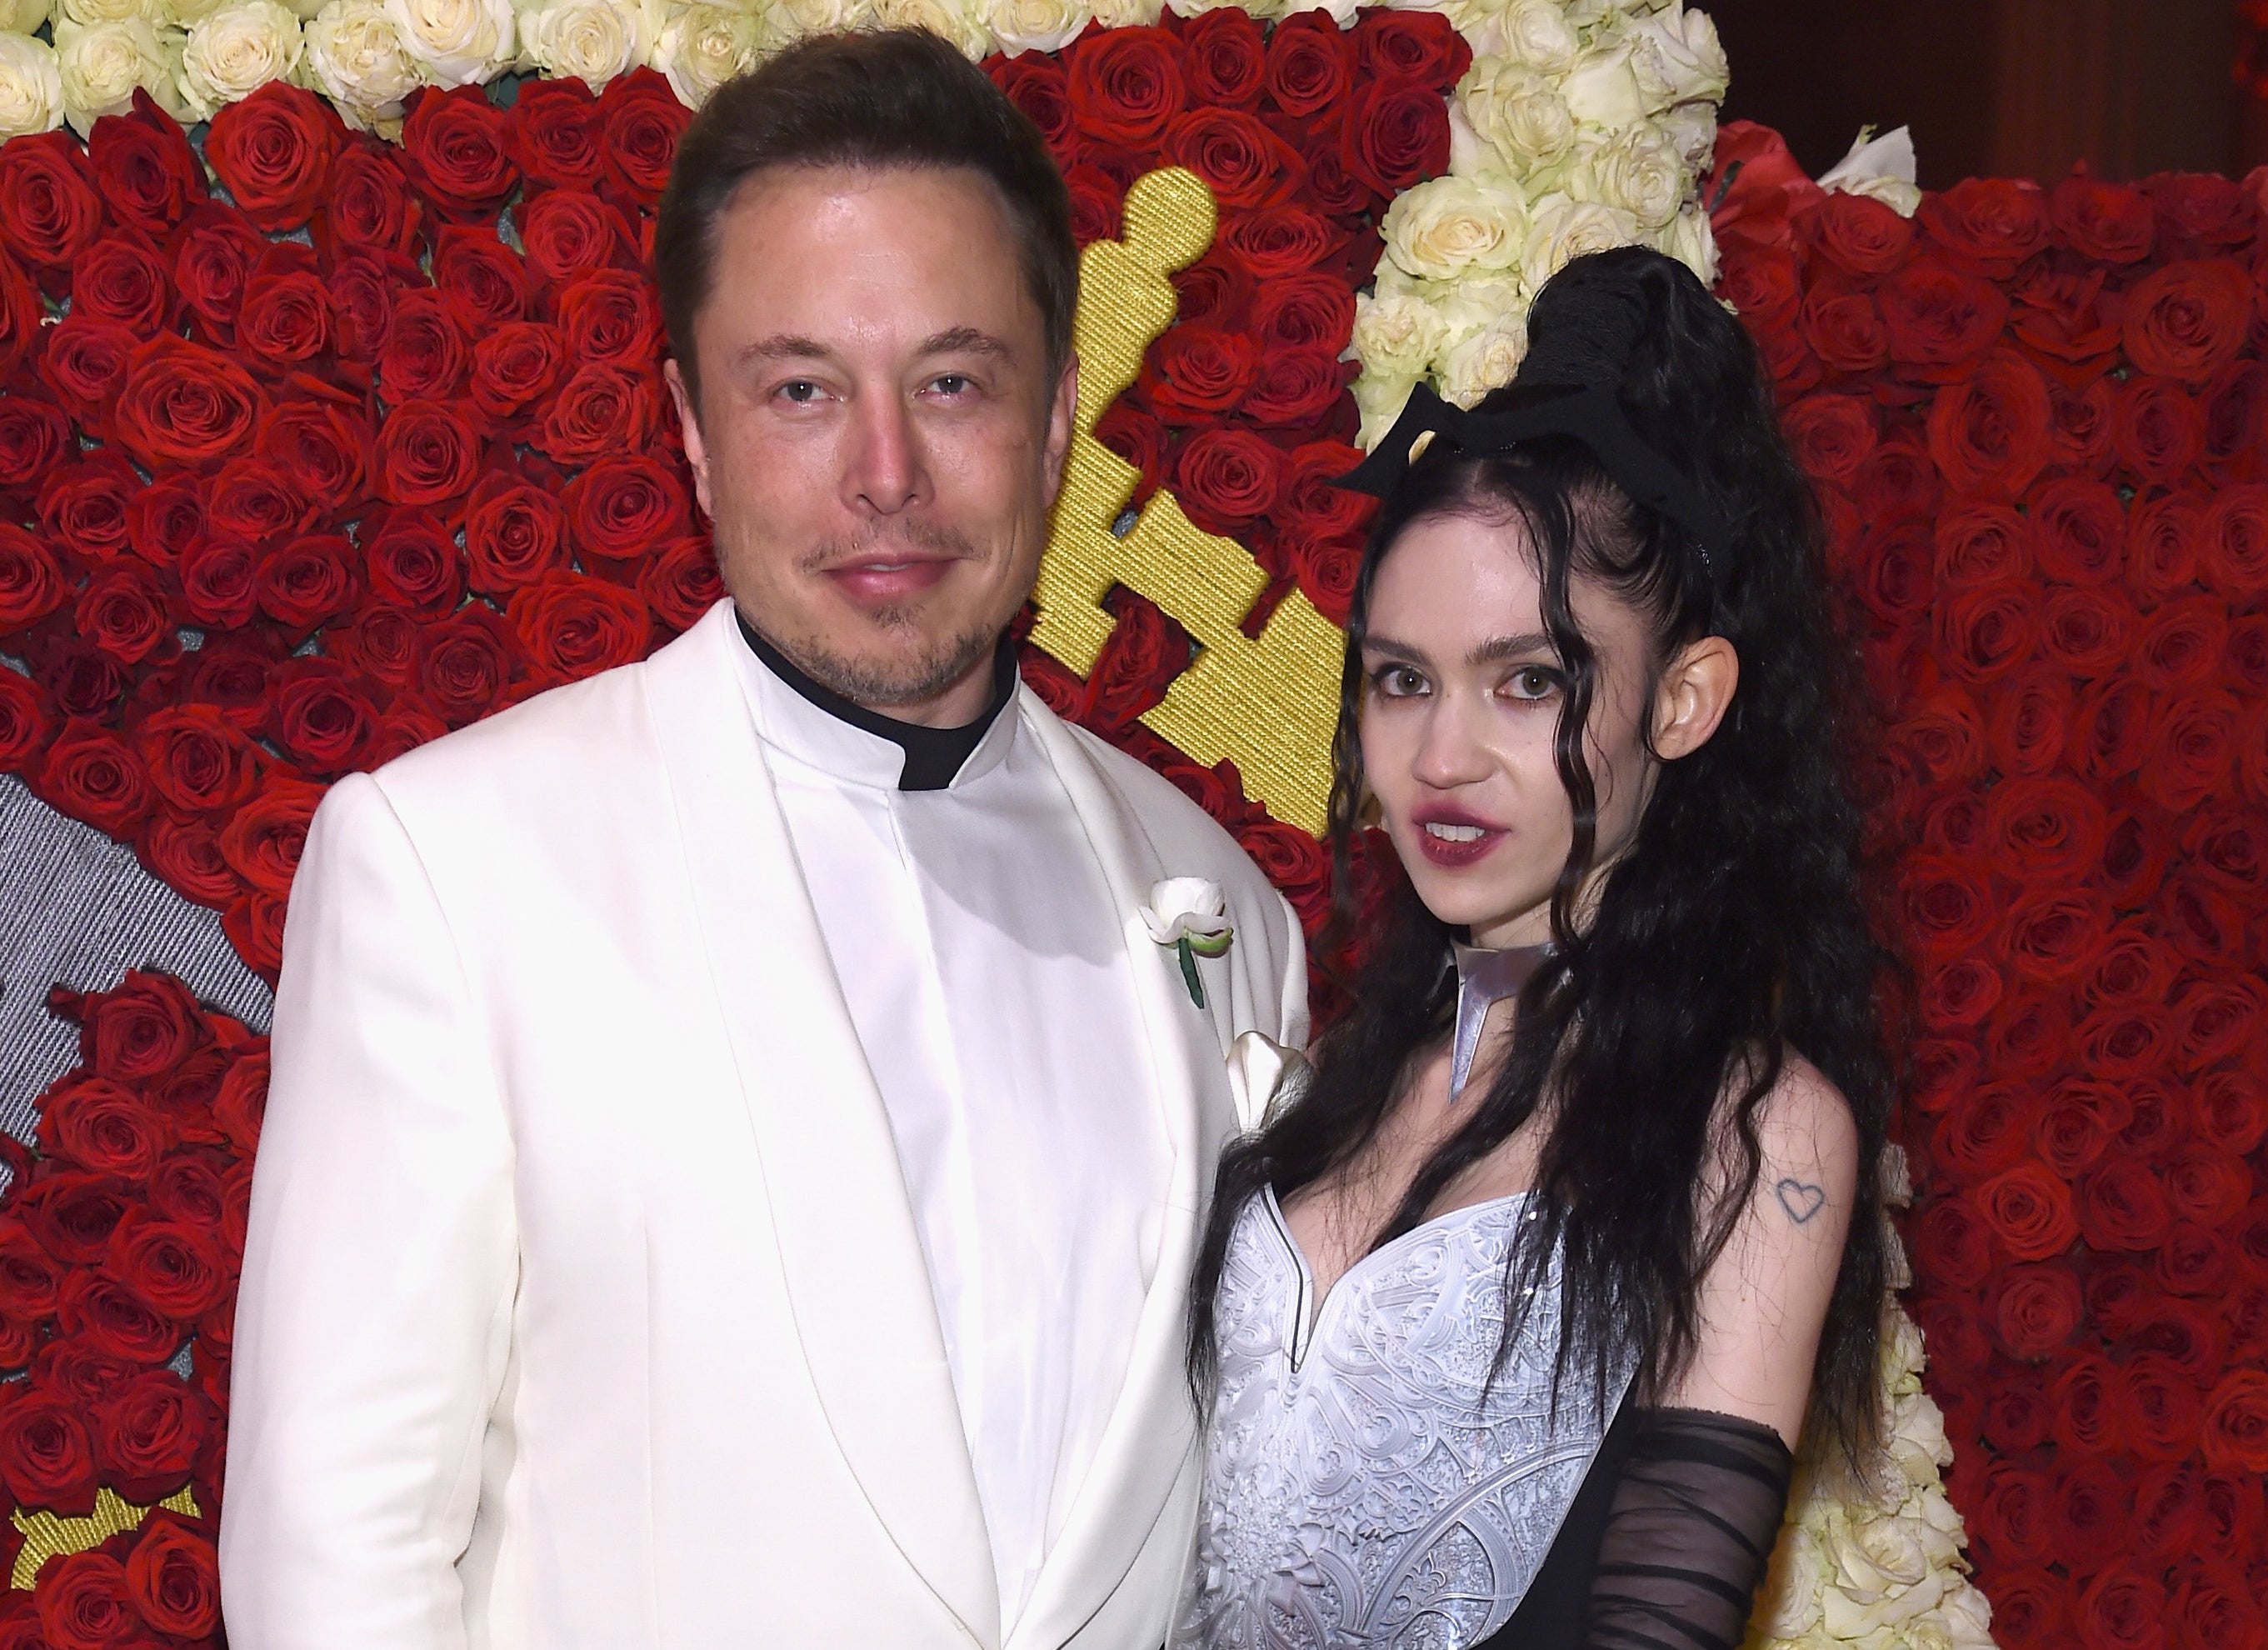 Grimes and Elon attend an event together